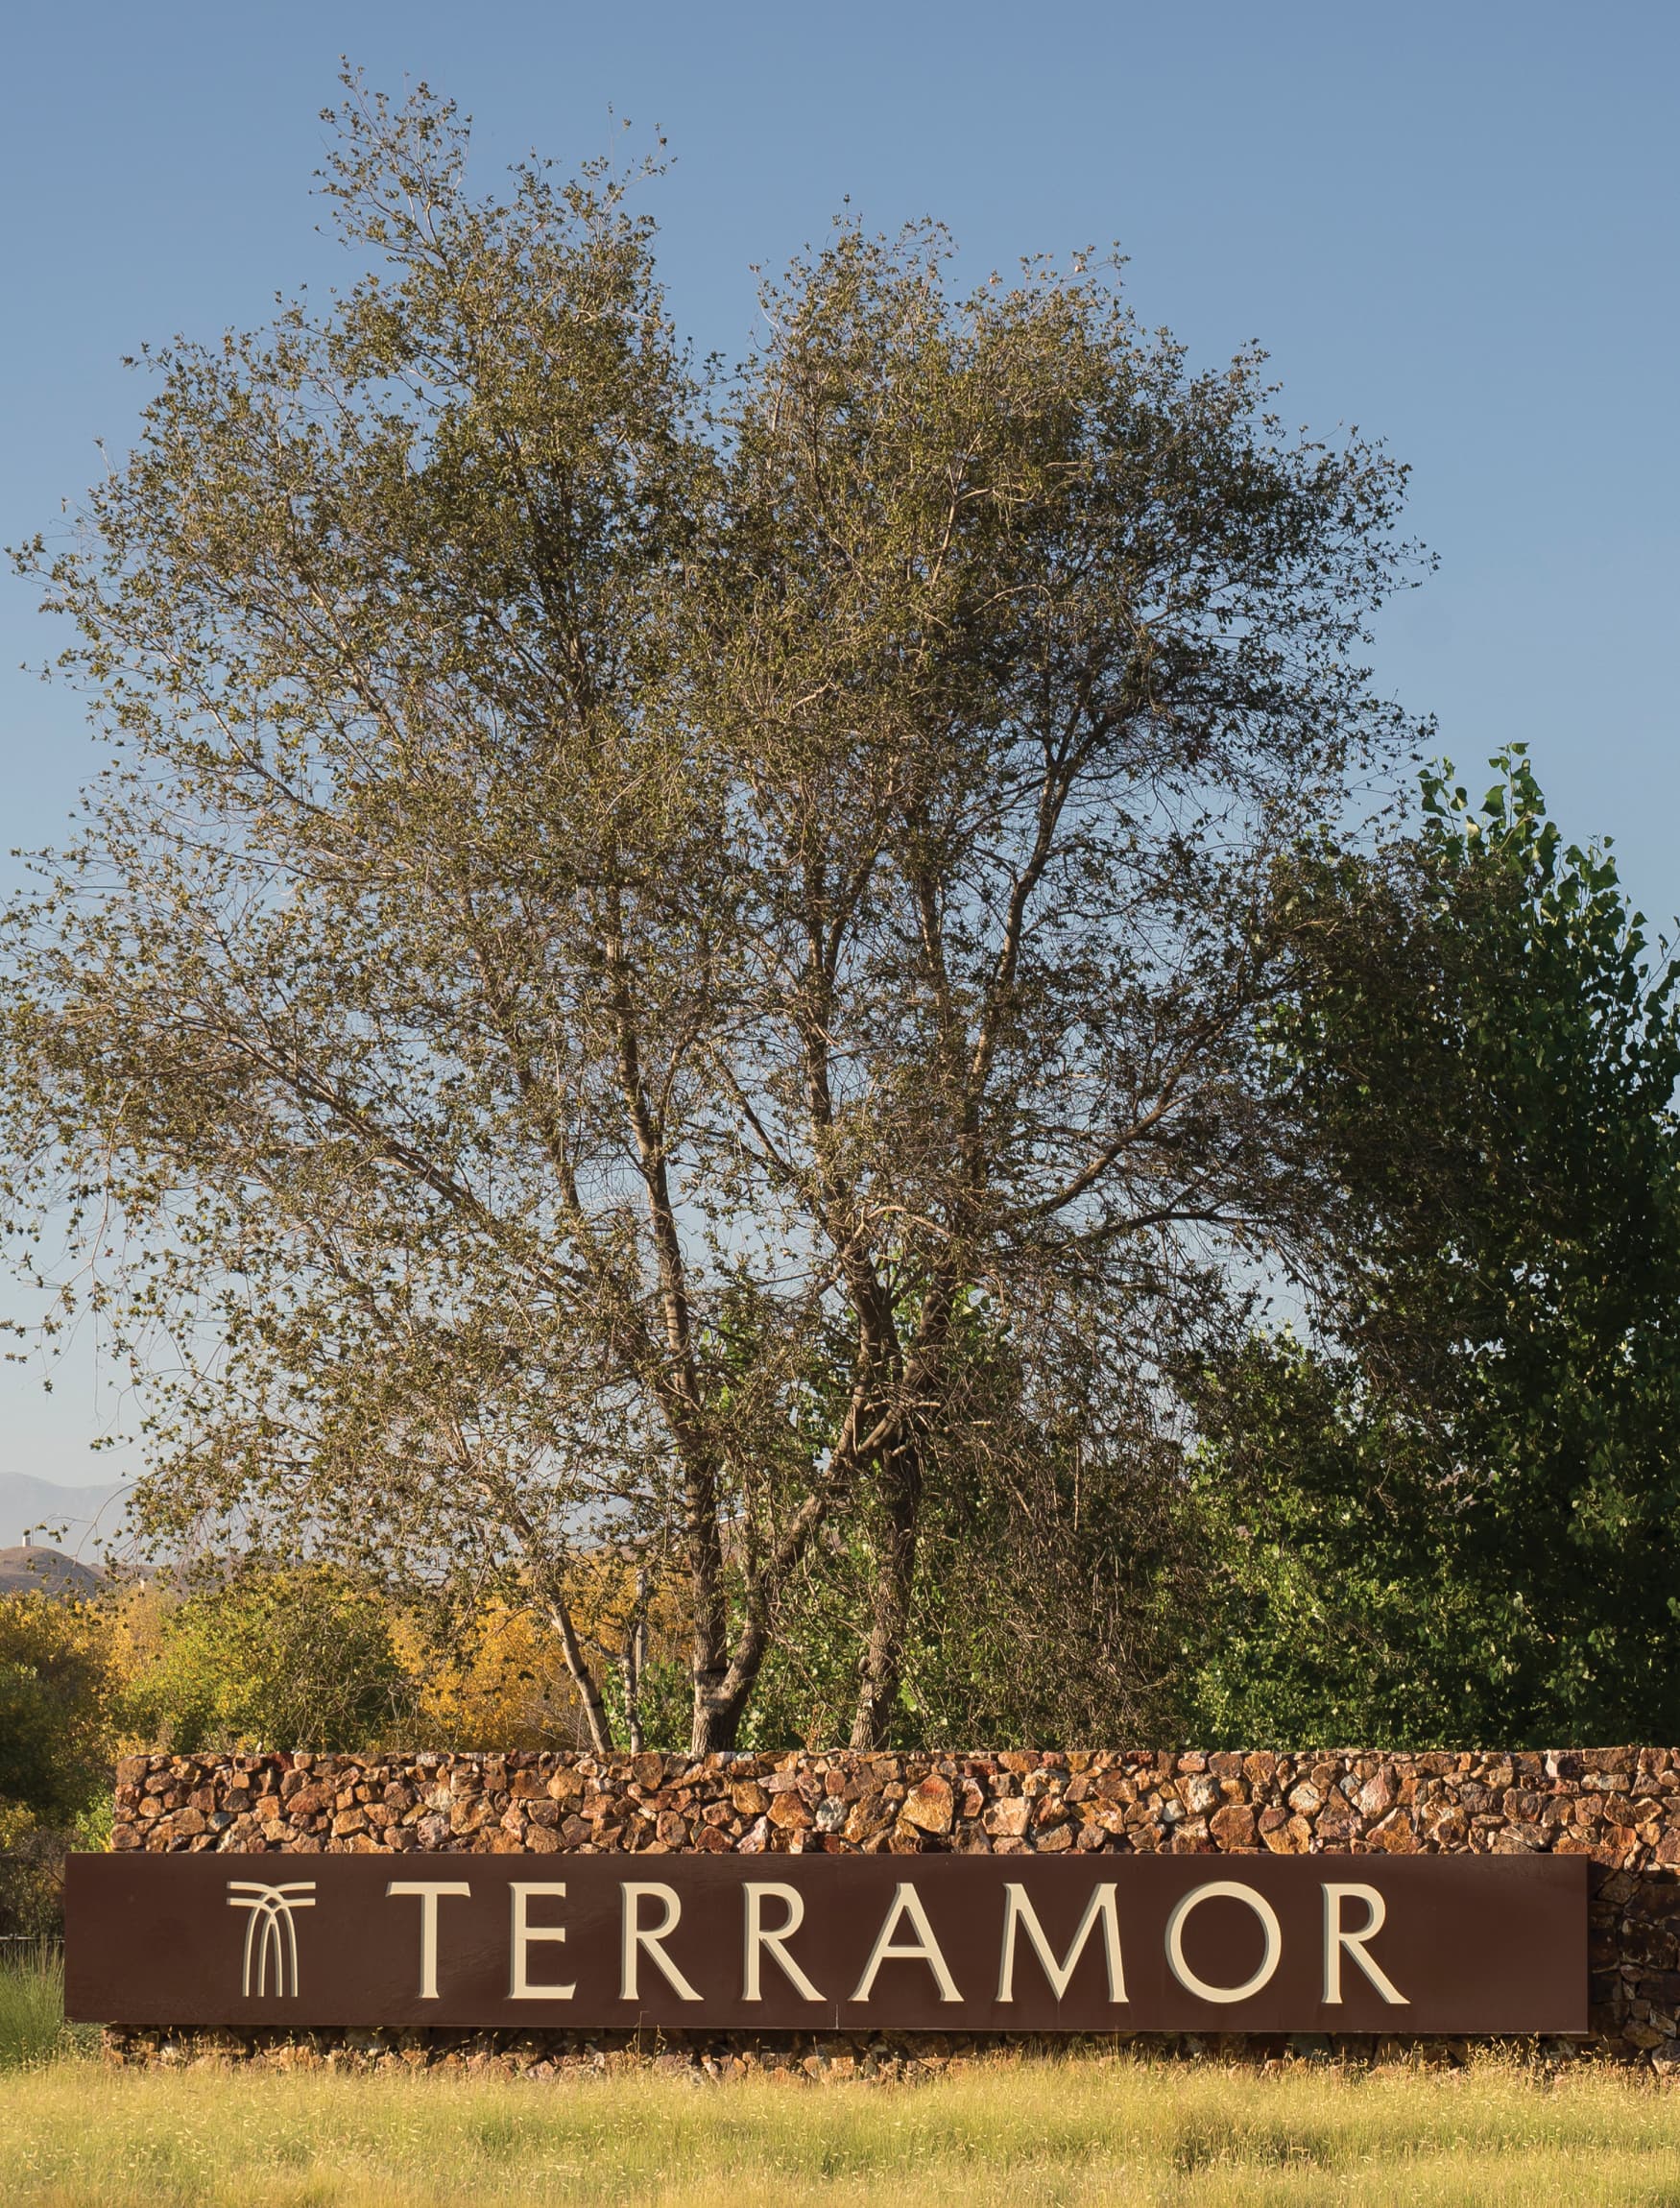 Terramor, a residential community in Corona, California. RSM Design. Stacked Stone Landscape Wall with Project Identity. Residential Placemaking Gateway.